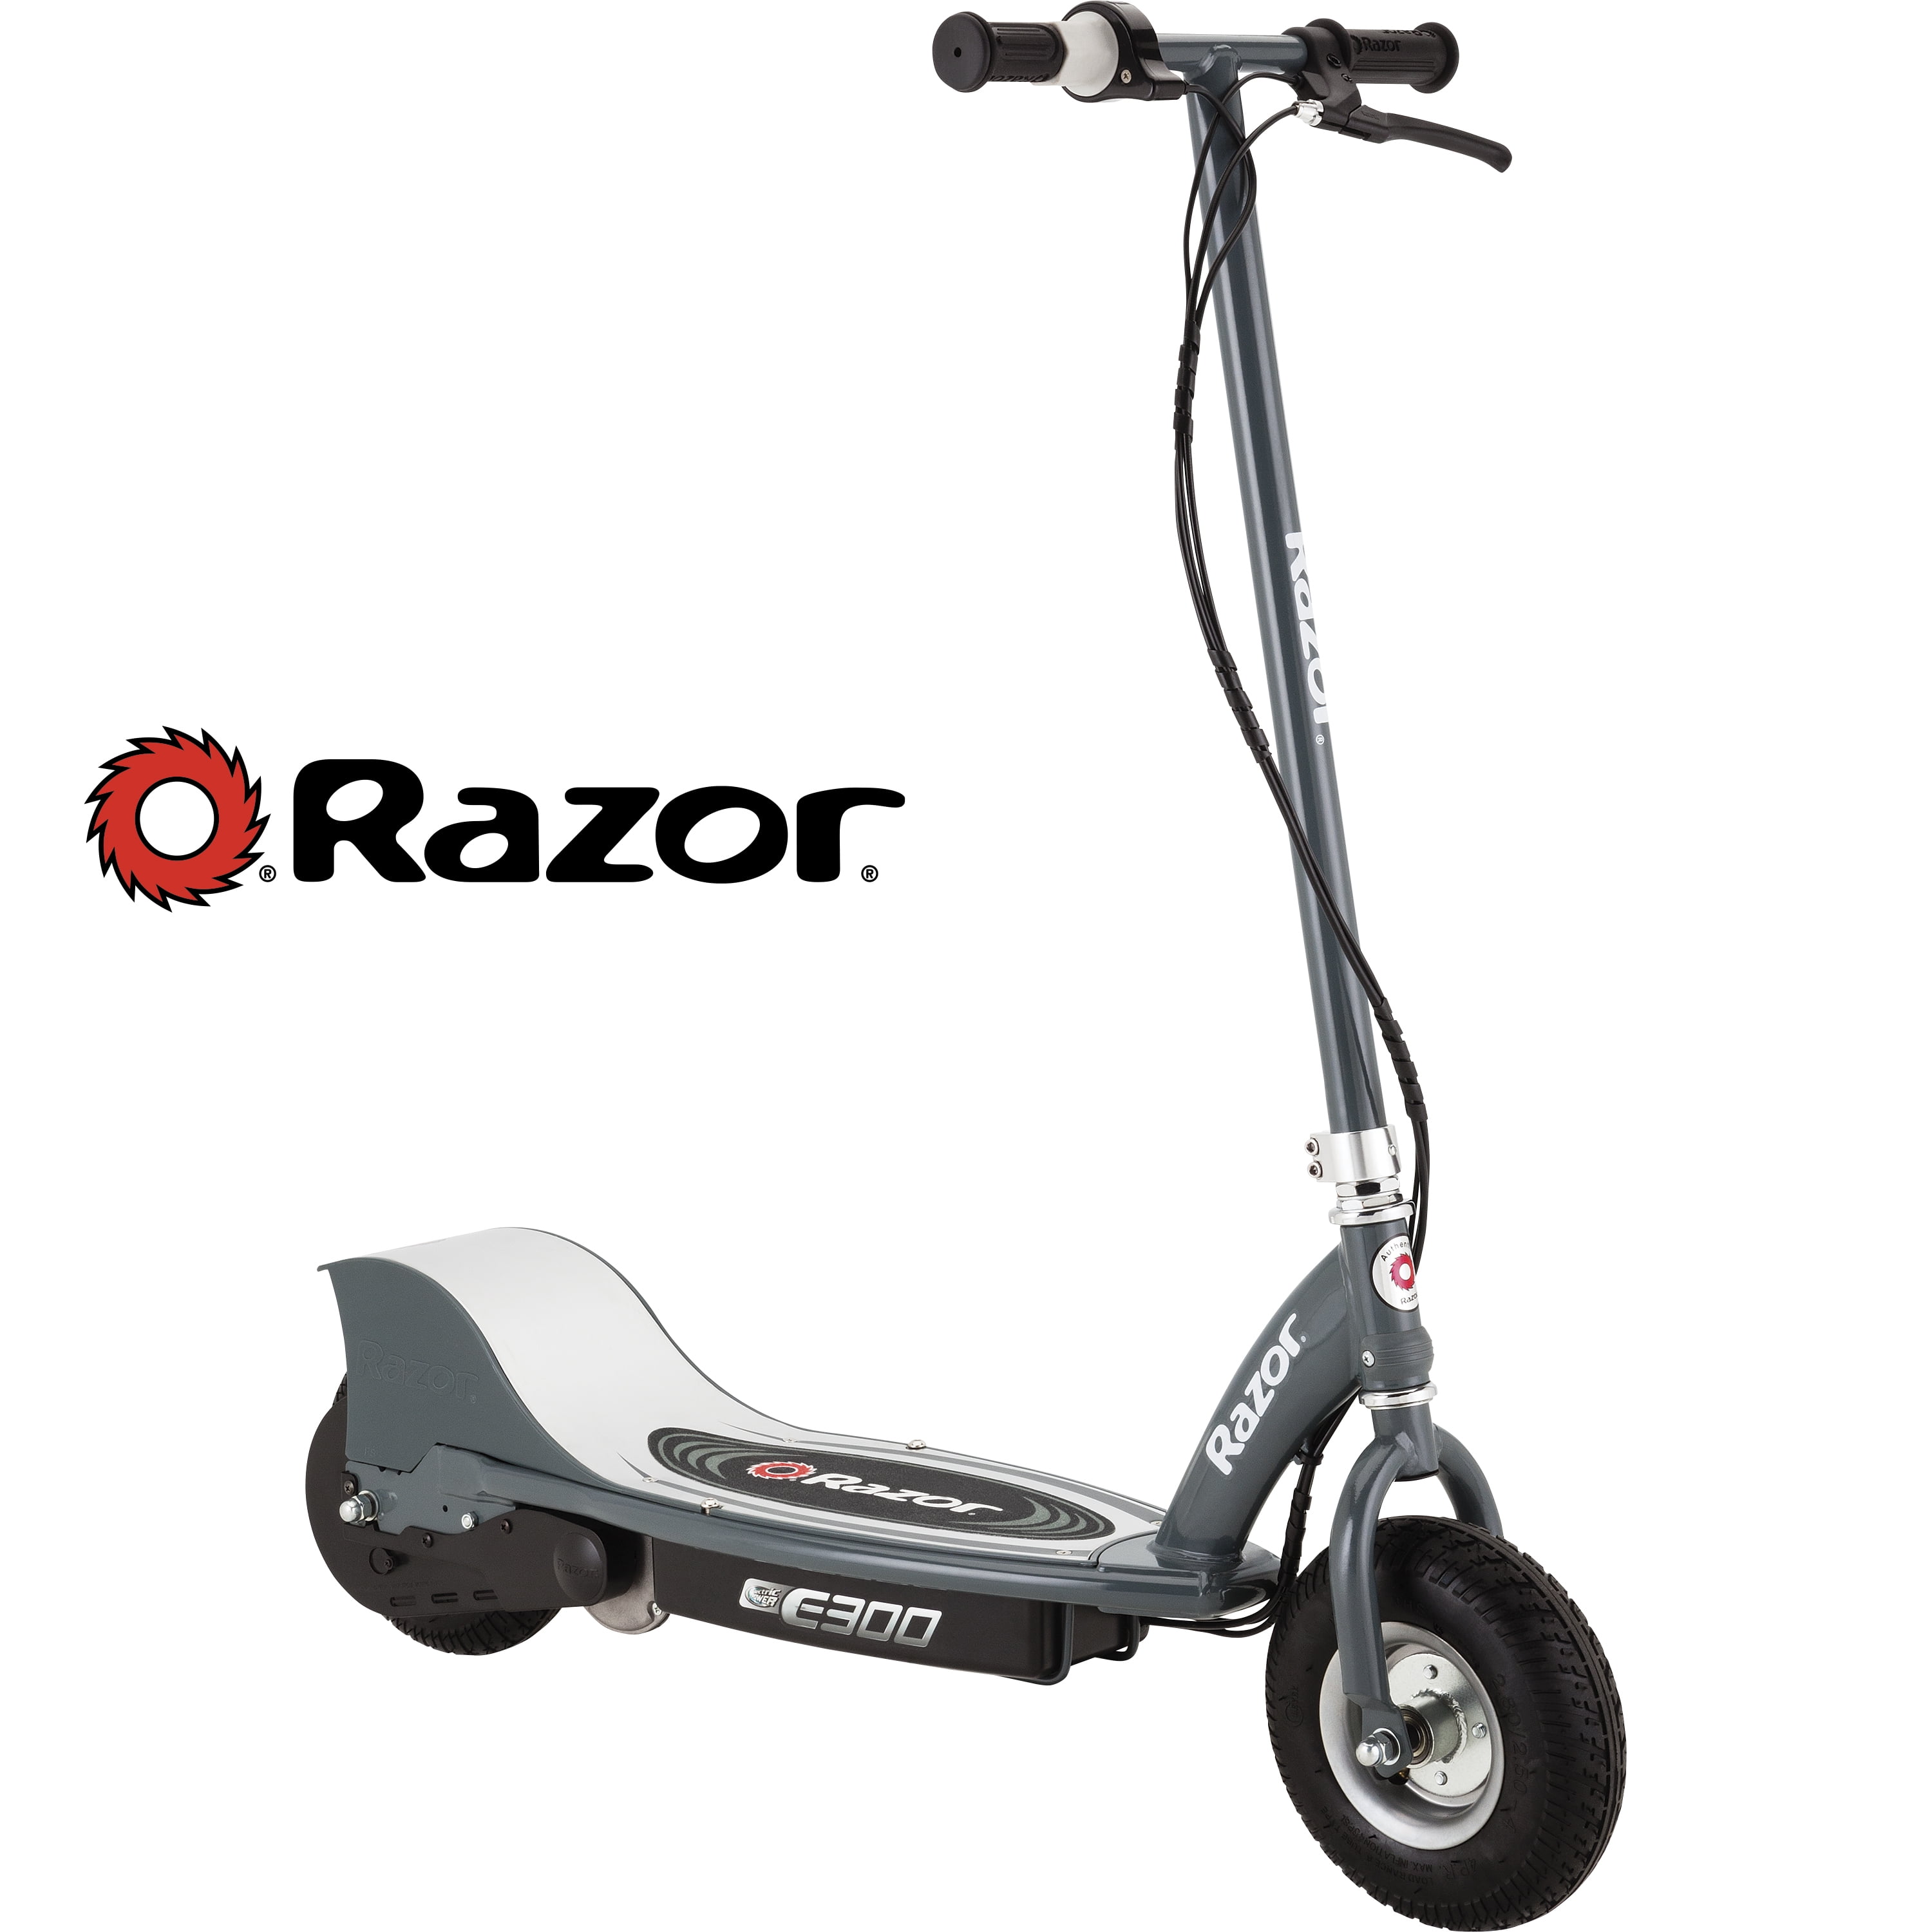 Razor E300 24 Volt Electric Powered Scooter With Rear Wheel Drive